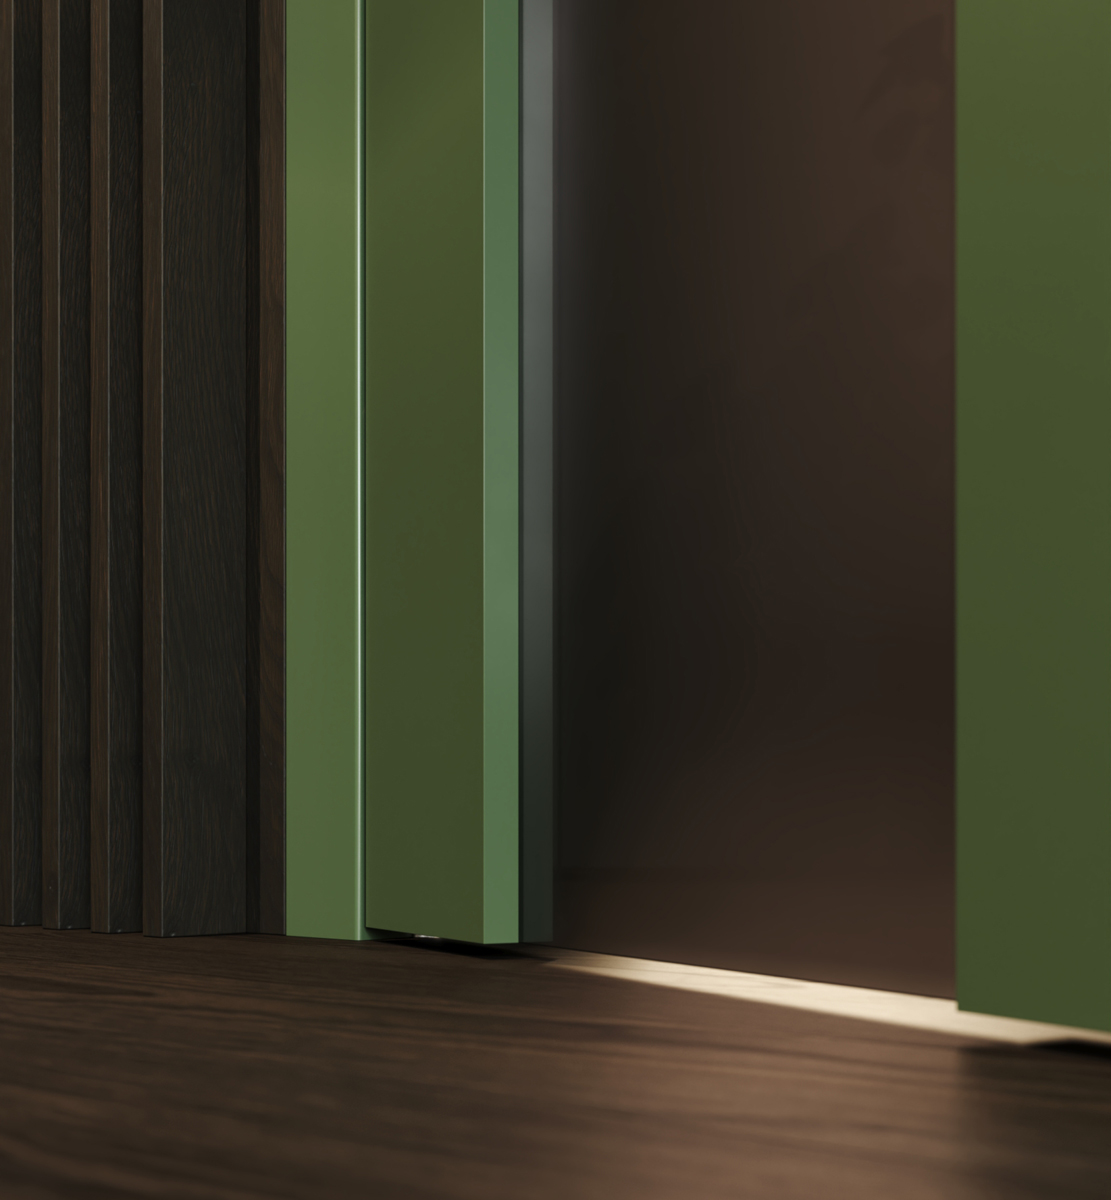 Simple and elegant glass doors from the HANÁK collection.